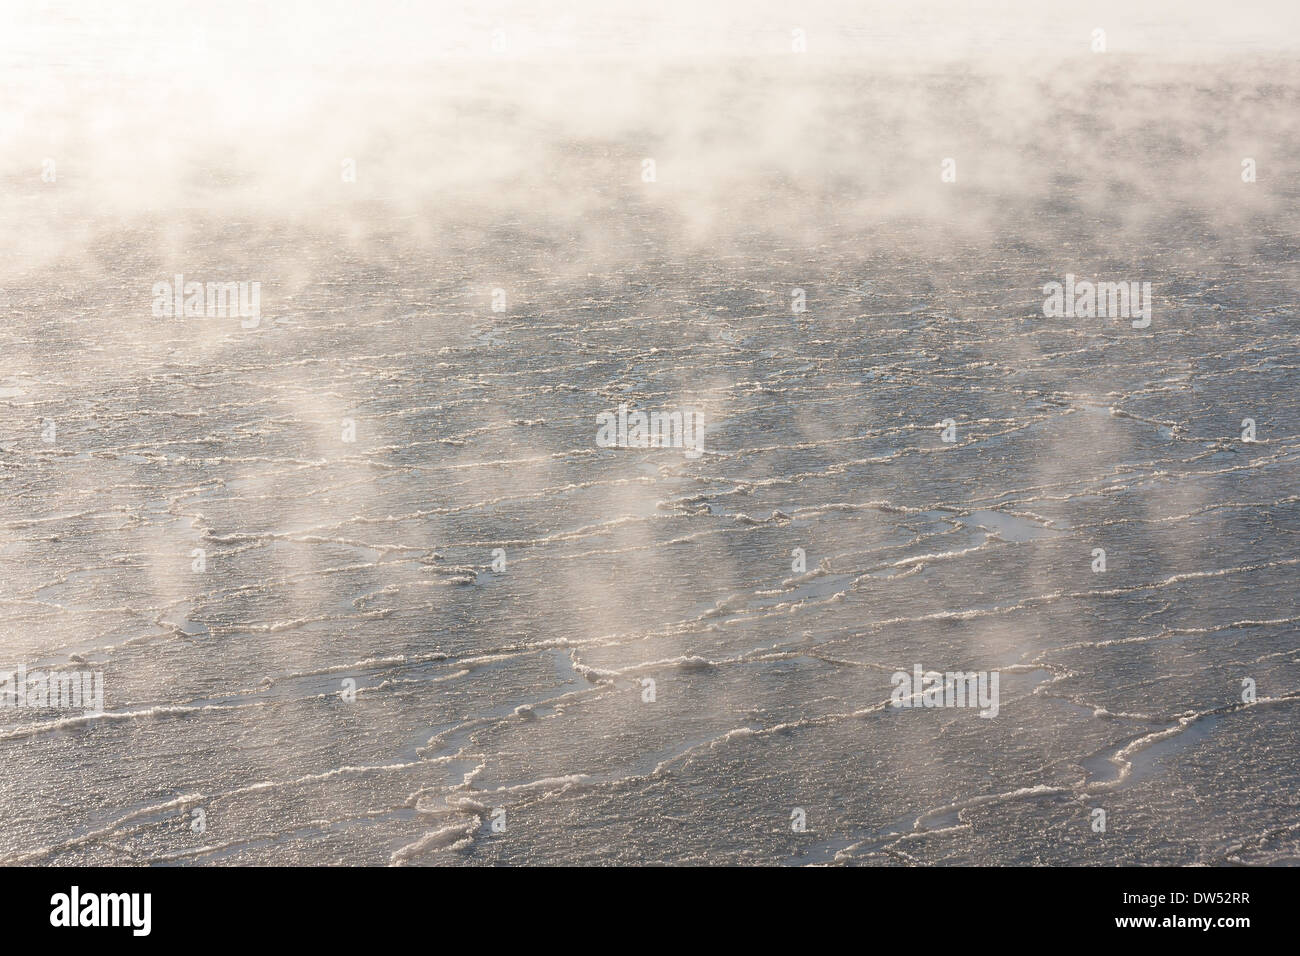 Mist or fog above icy or half frozen water Stock Photo